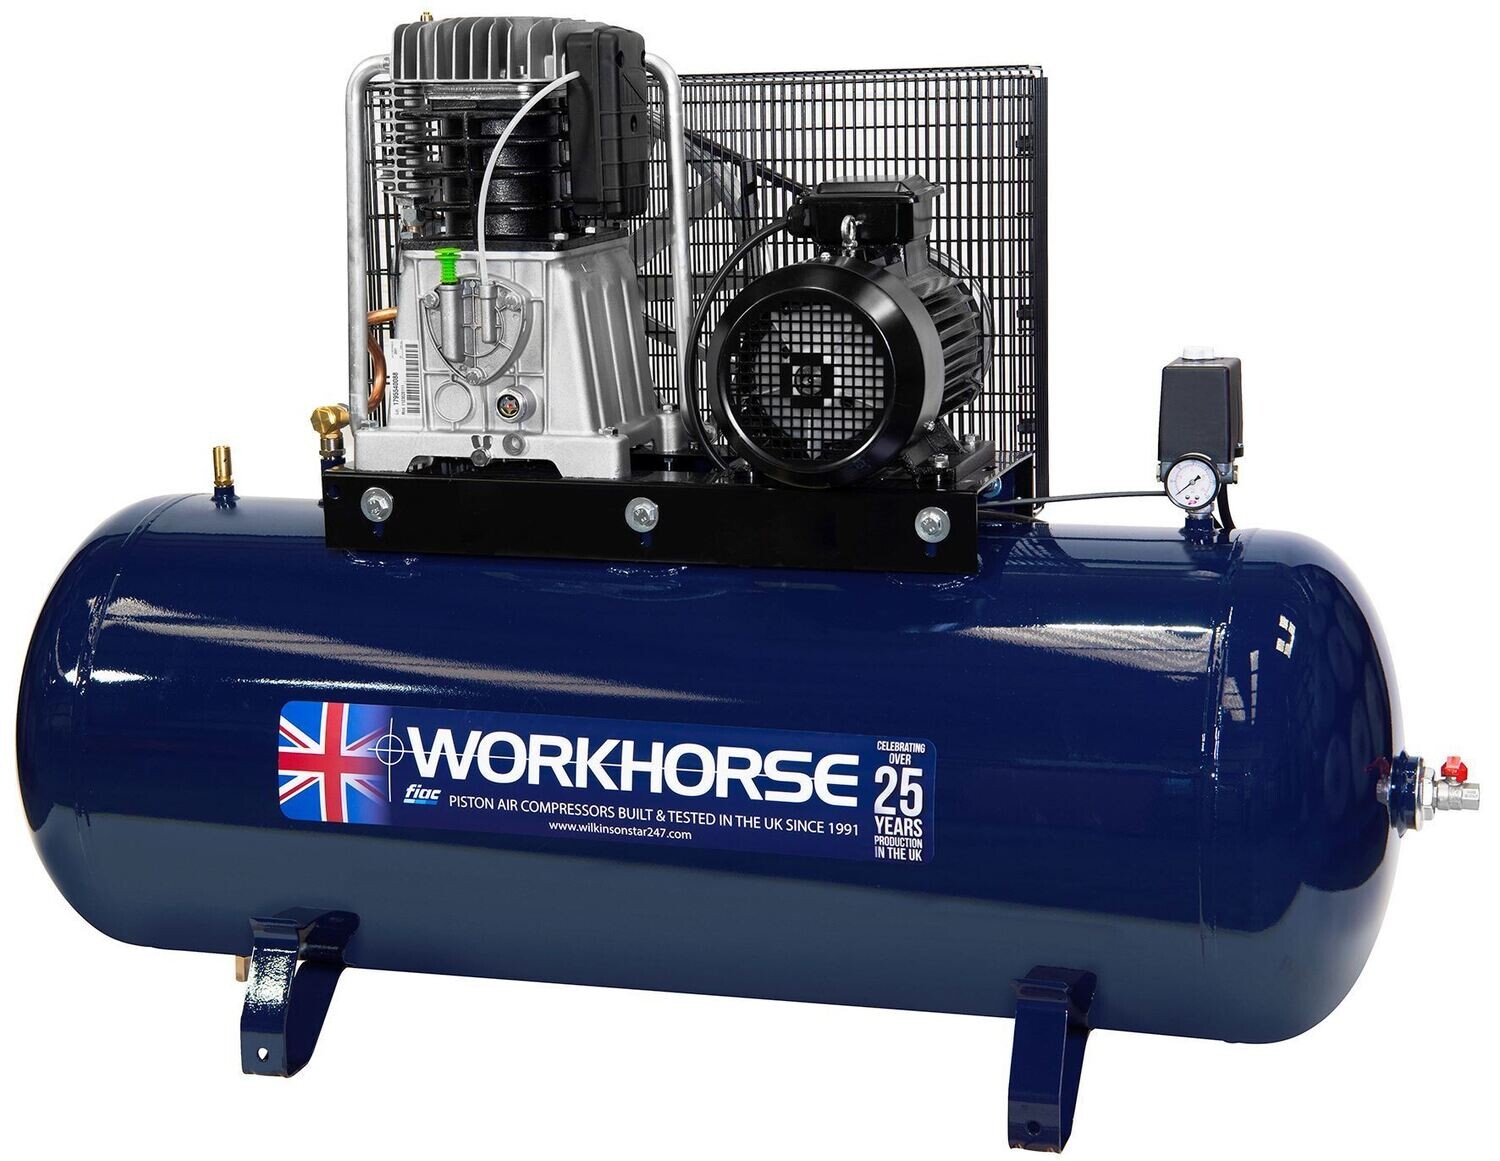 Workhorse Air Compressor 7.5HP 270L 400V (WRN7.5HP-270S)
( Available with free of charge UK mainland delivery )